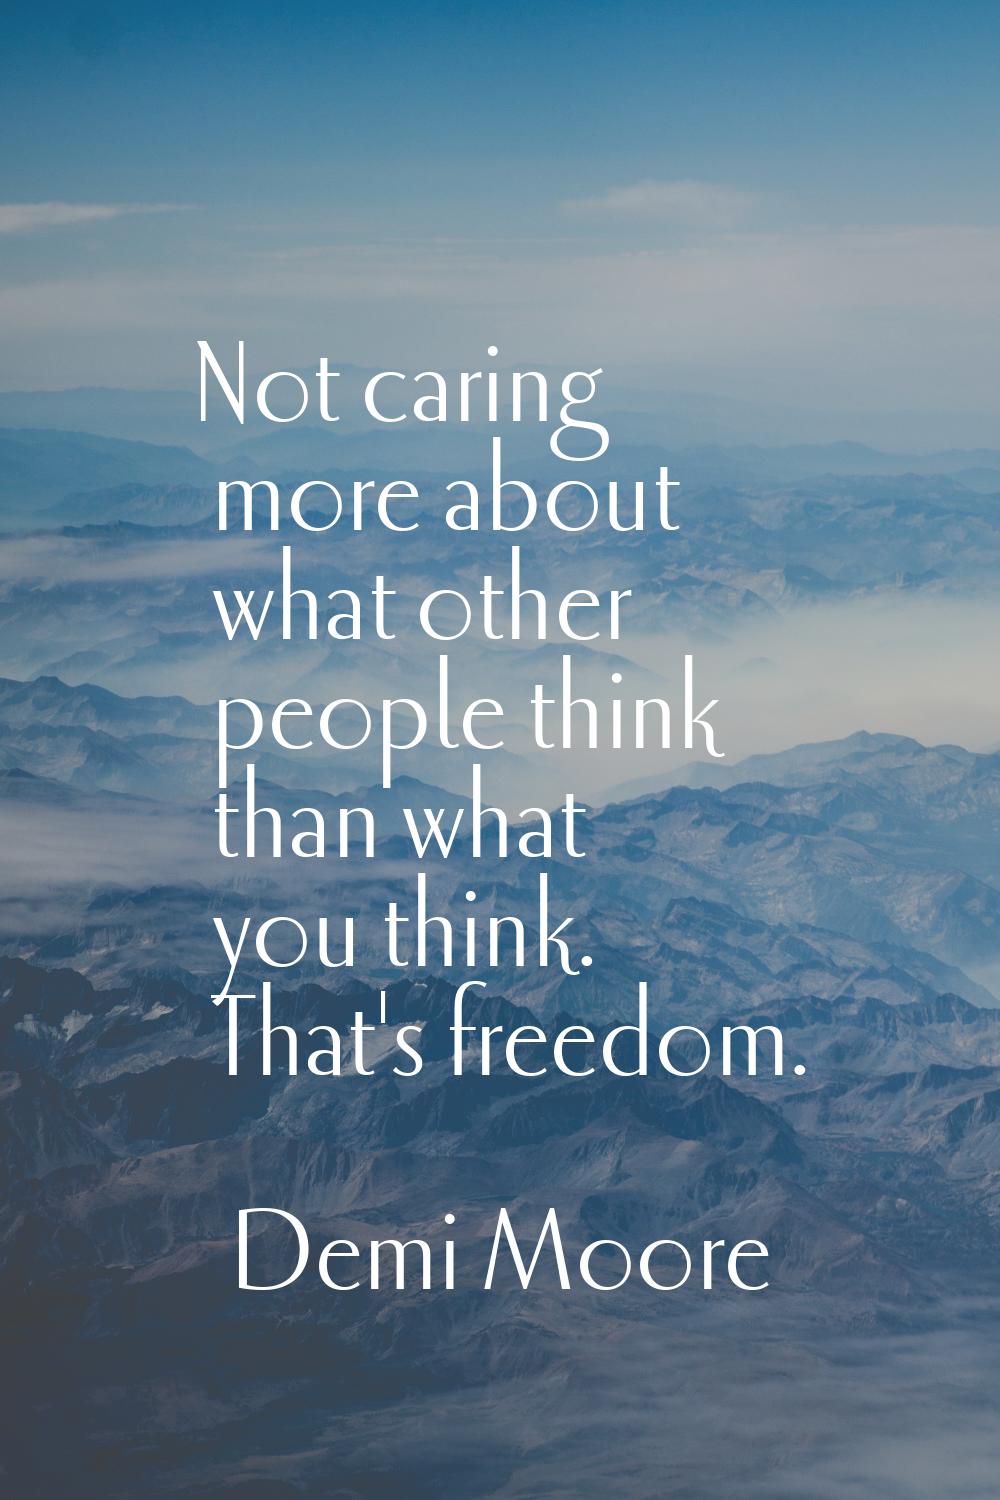 Not caring more about what other people think than what you think. That's freedom.